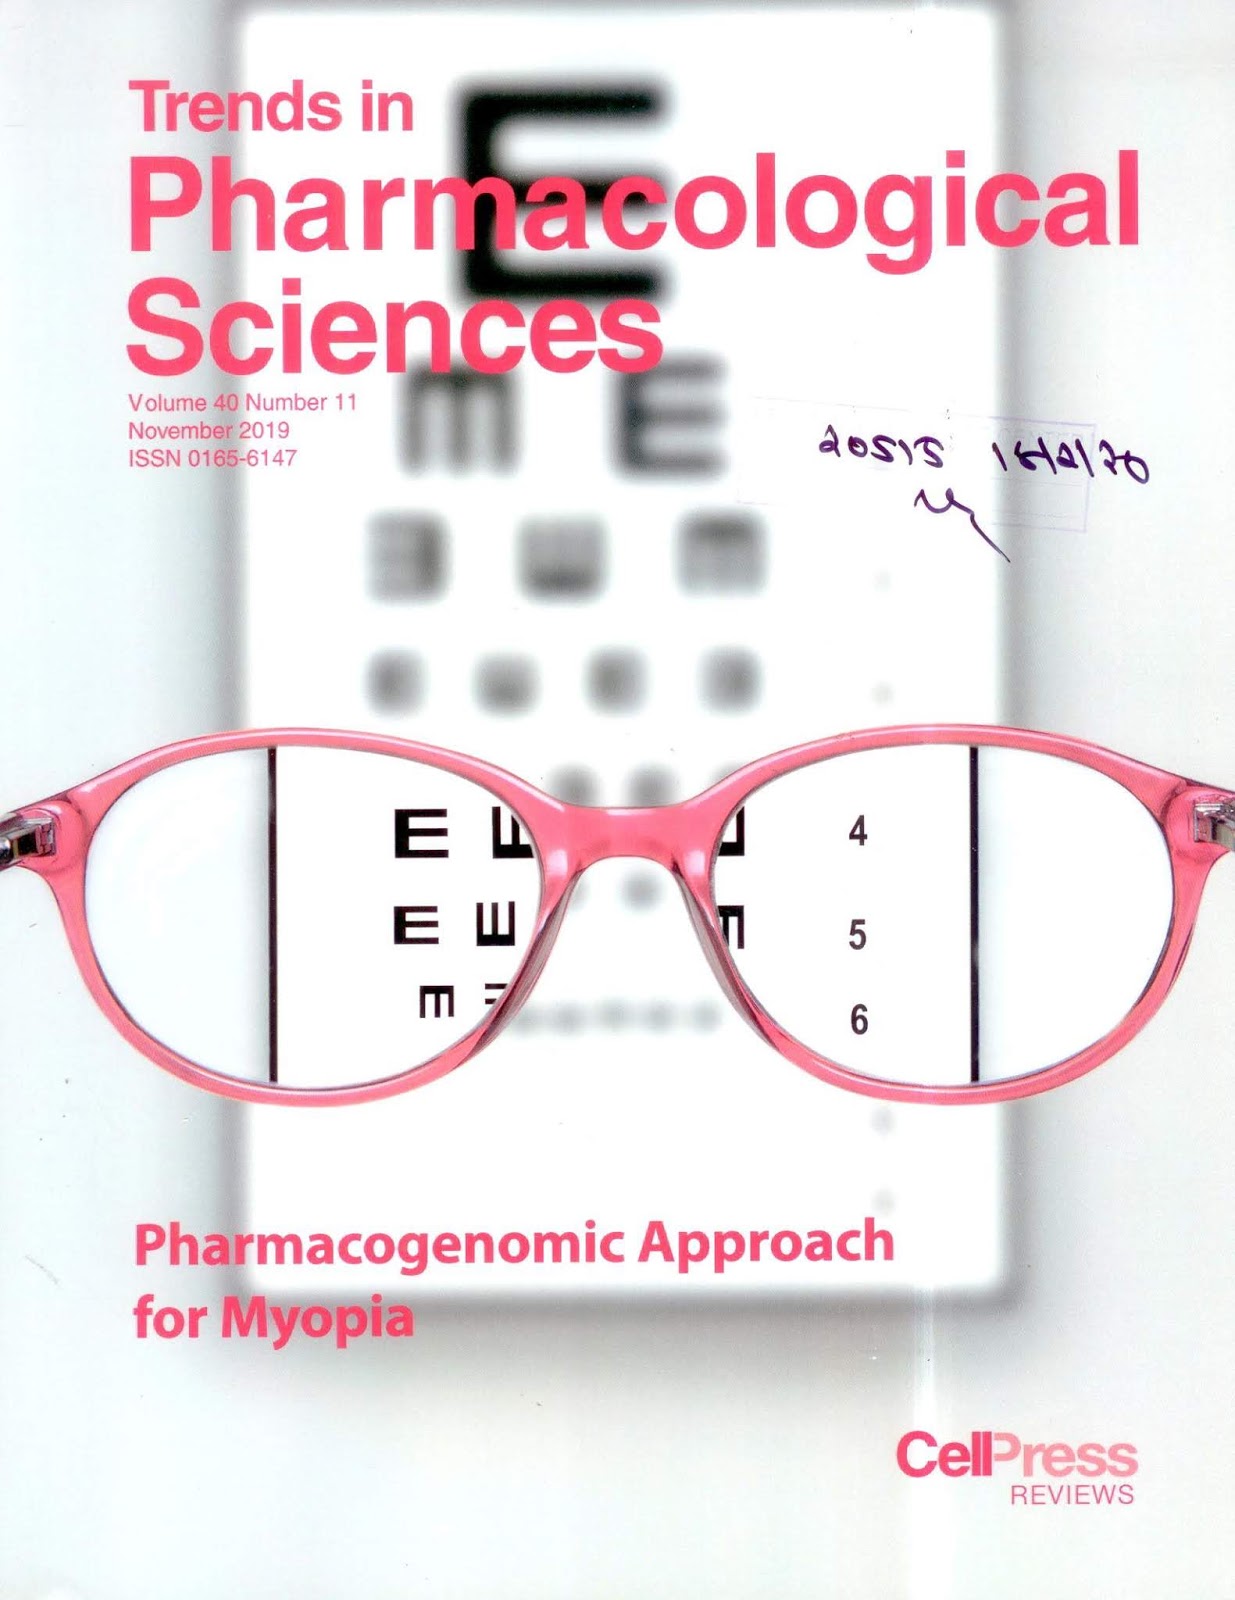 https://www.cell.com/trends/pharmacological-sciences/issue?pii=S0165-6147(18)X0012-1